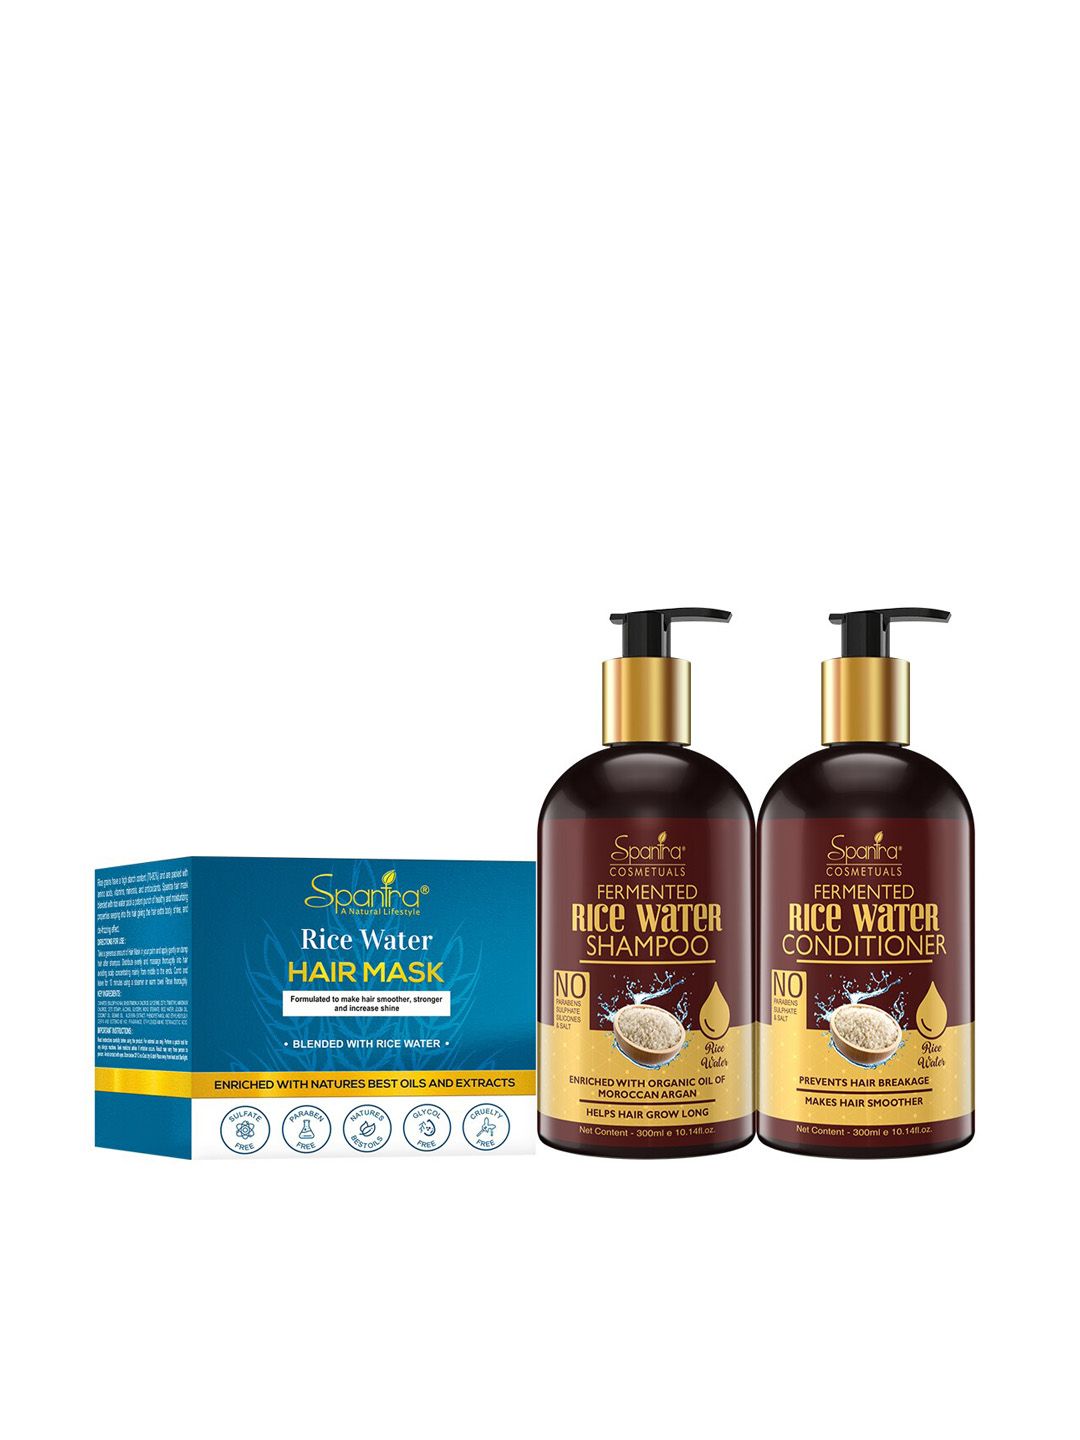 Spantra Fermented Rice Water Shampoo & Conditioner with Hair Mask Price in India